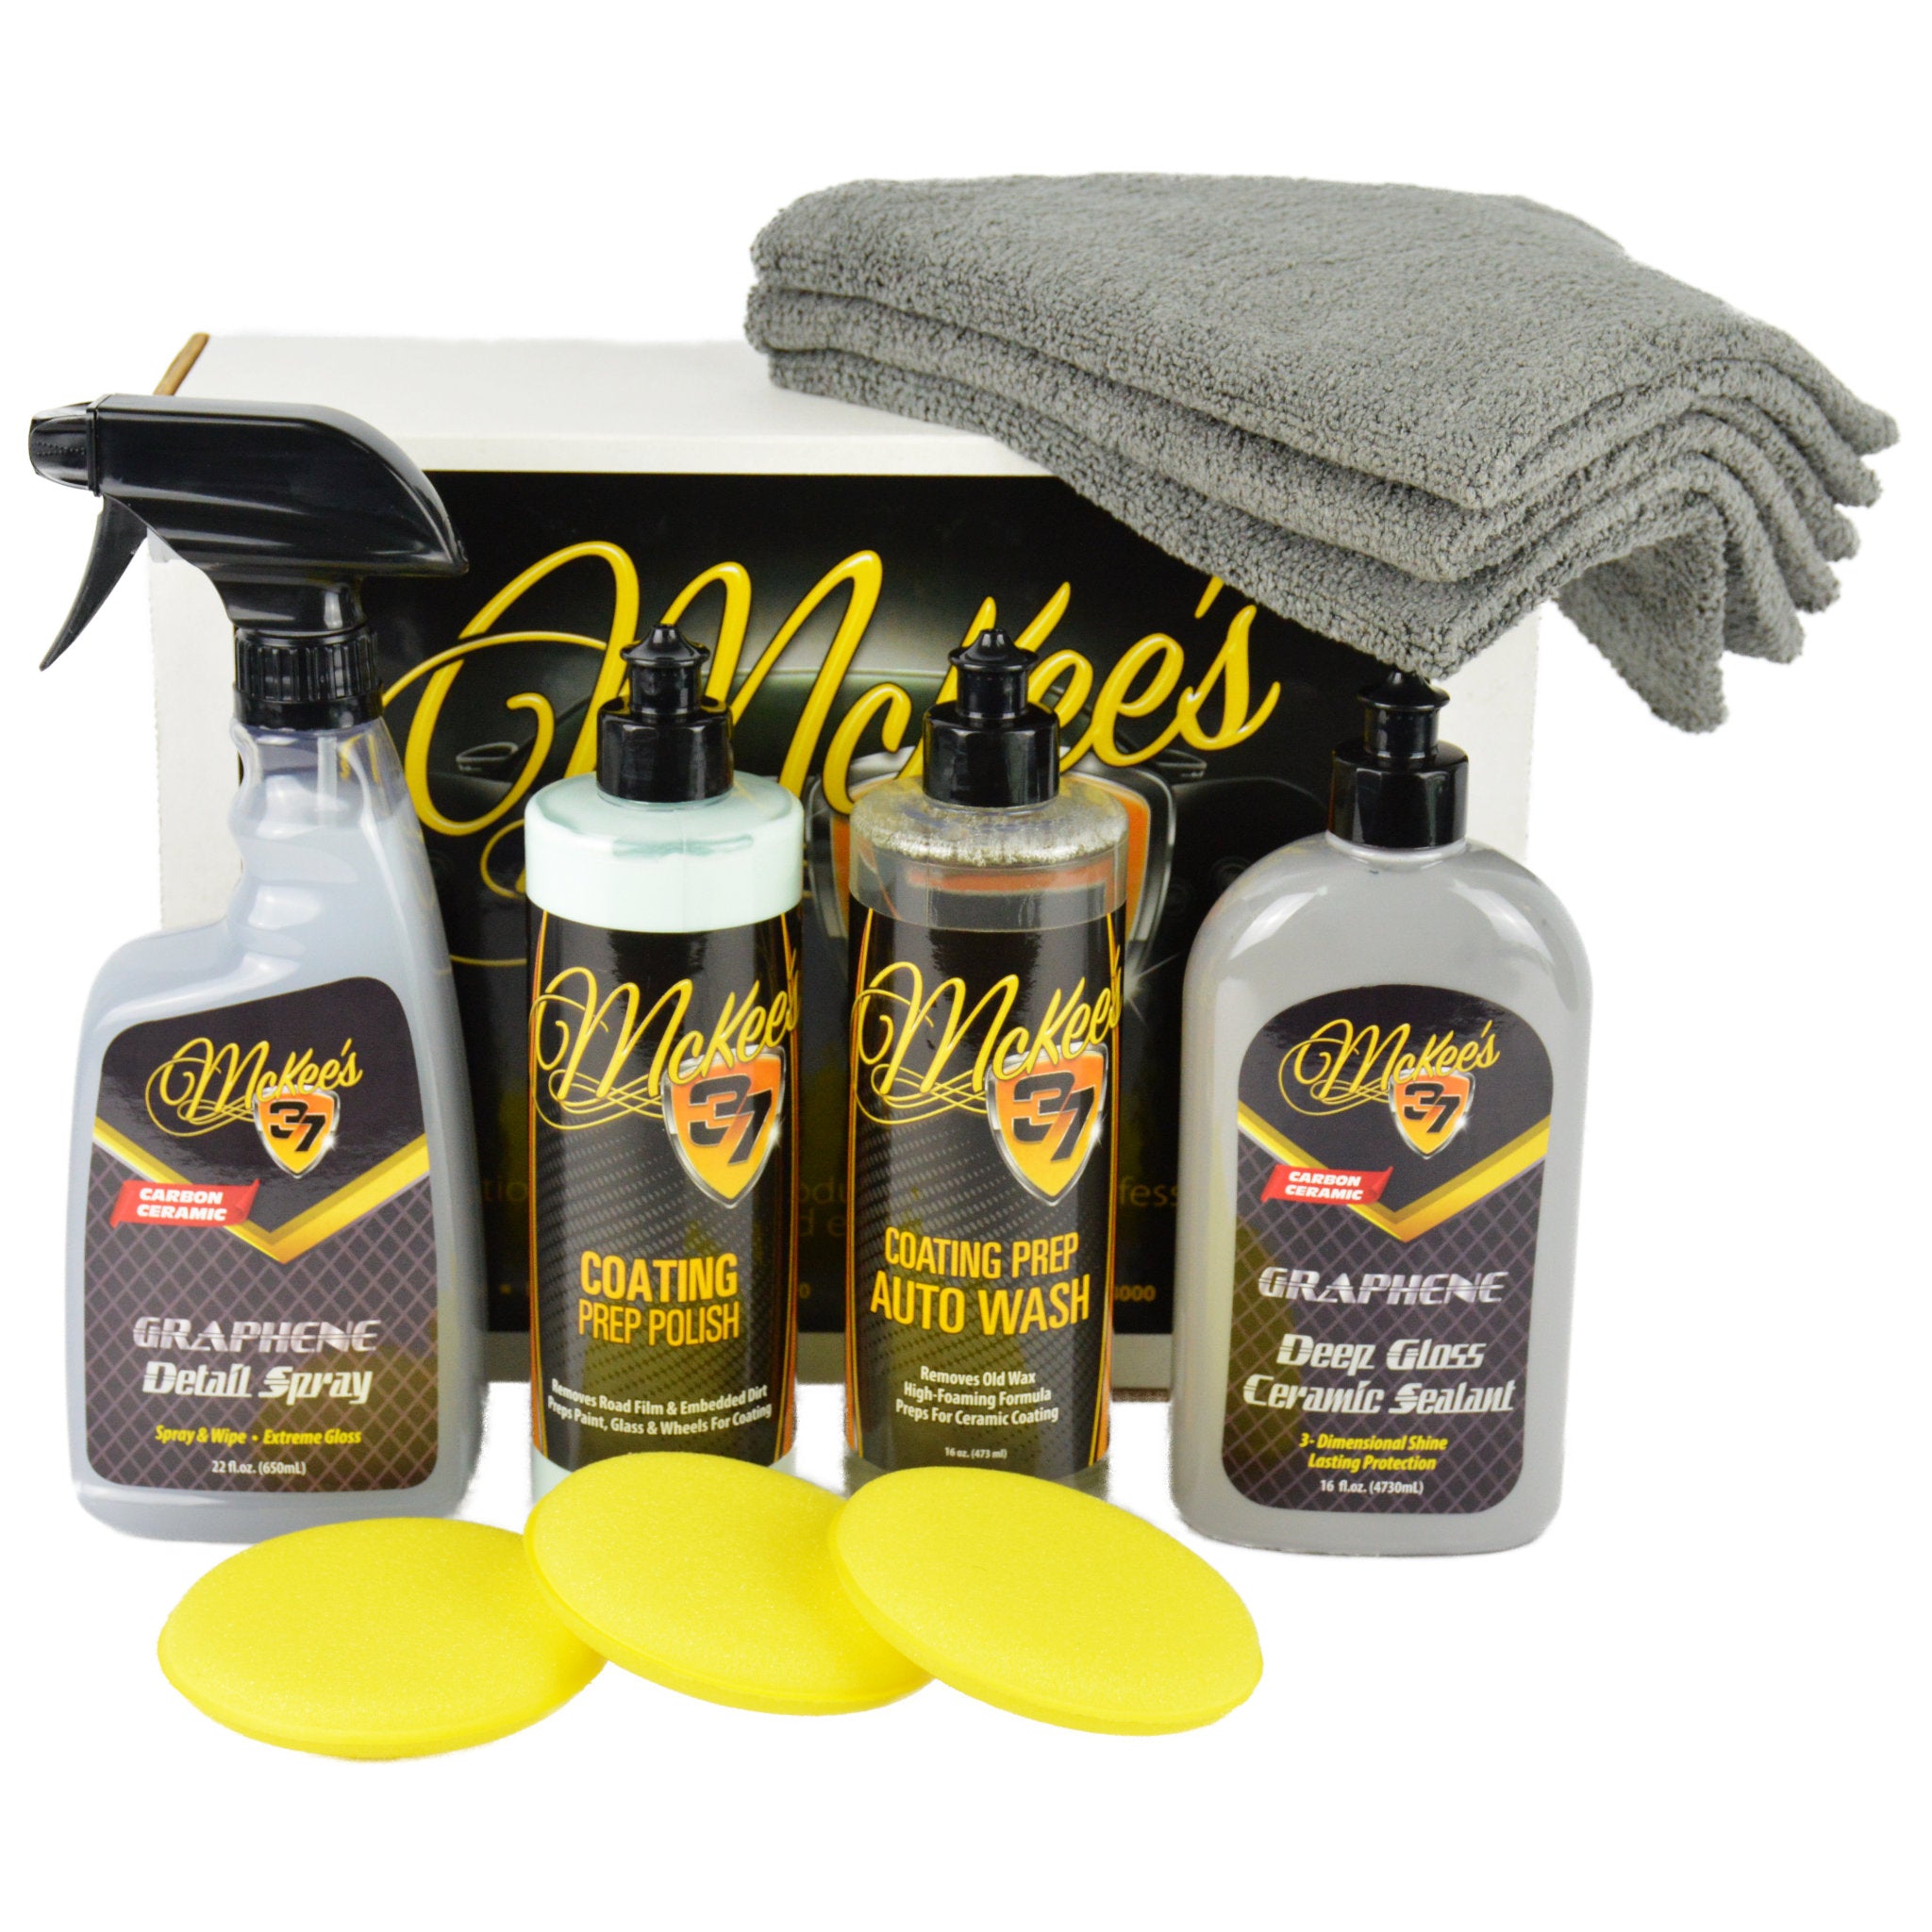 How to MAXIMISE RESULTS from our CAR CARE KIT, Deluxe Car Care Kit V2